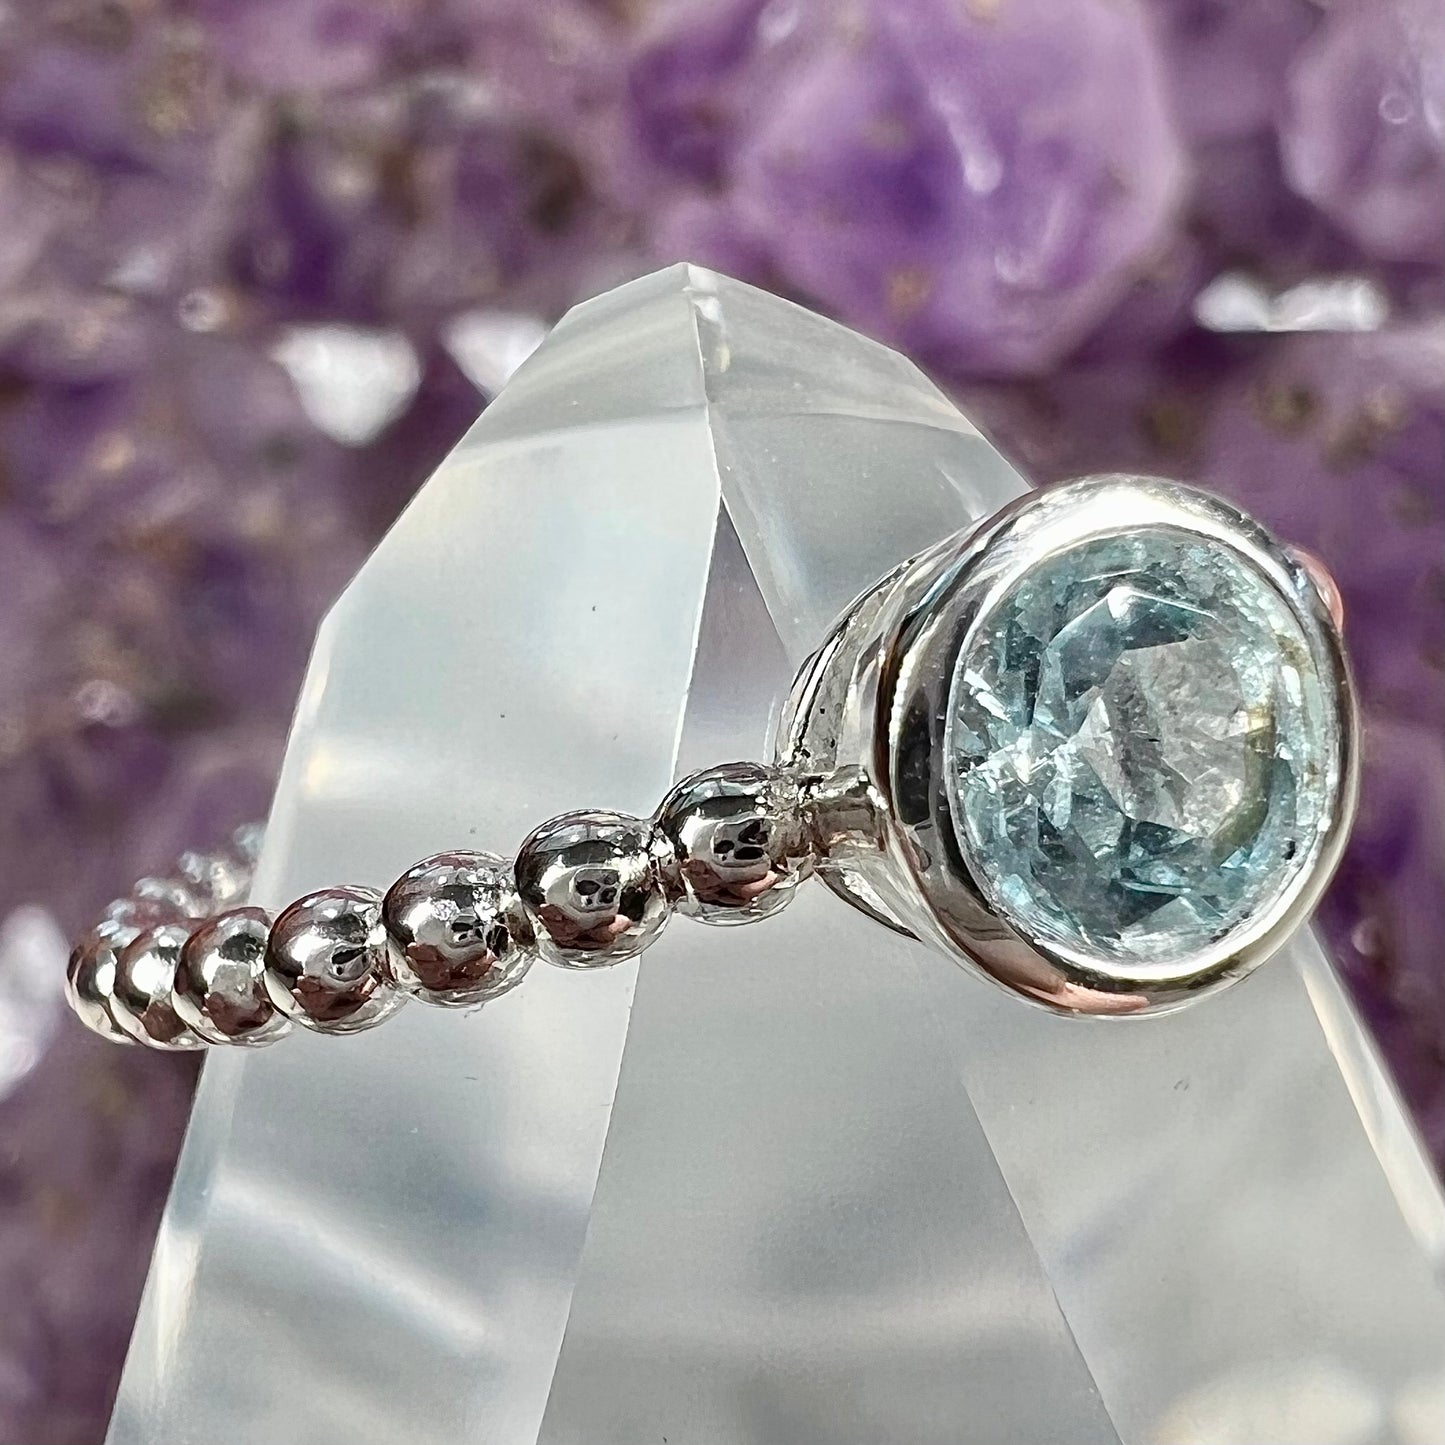 A silver, bezel set, round cut sky blue topaz solitaire ring.  The band is made of connected silver balls.